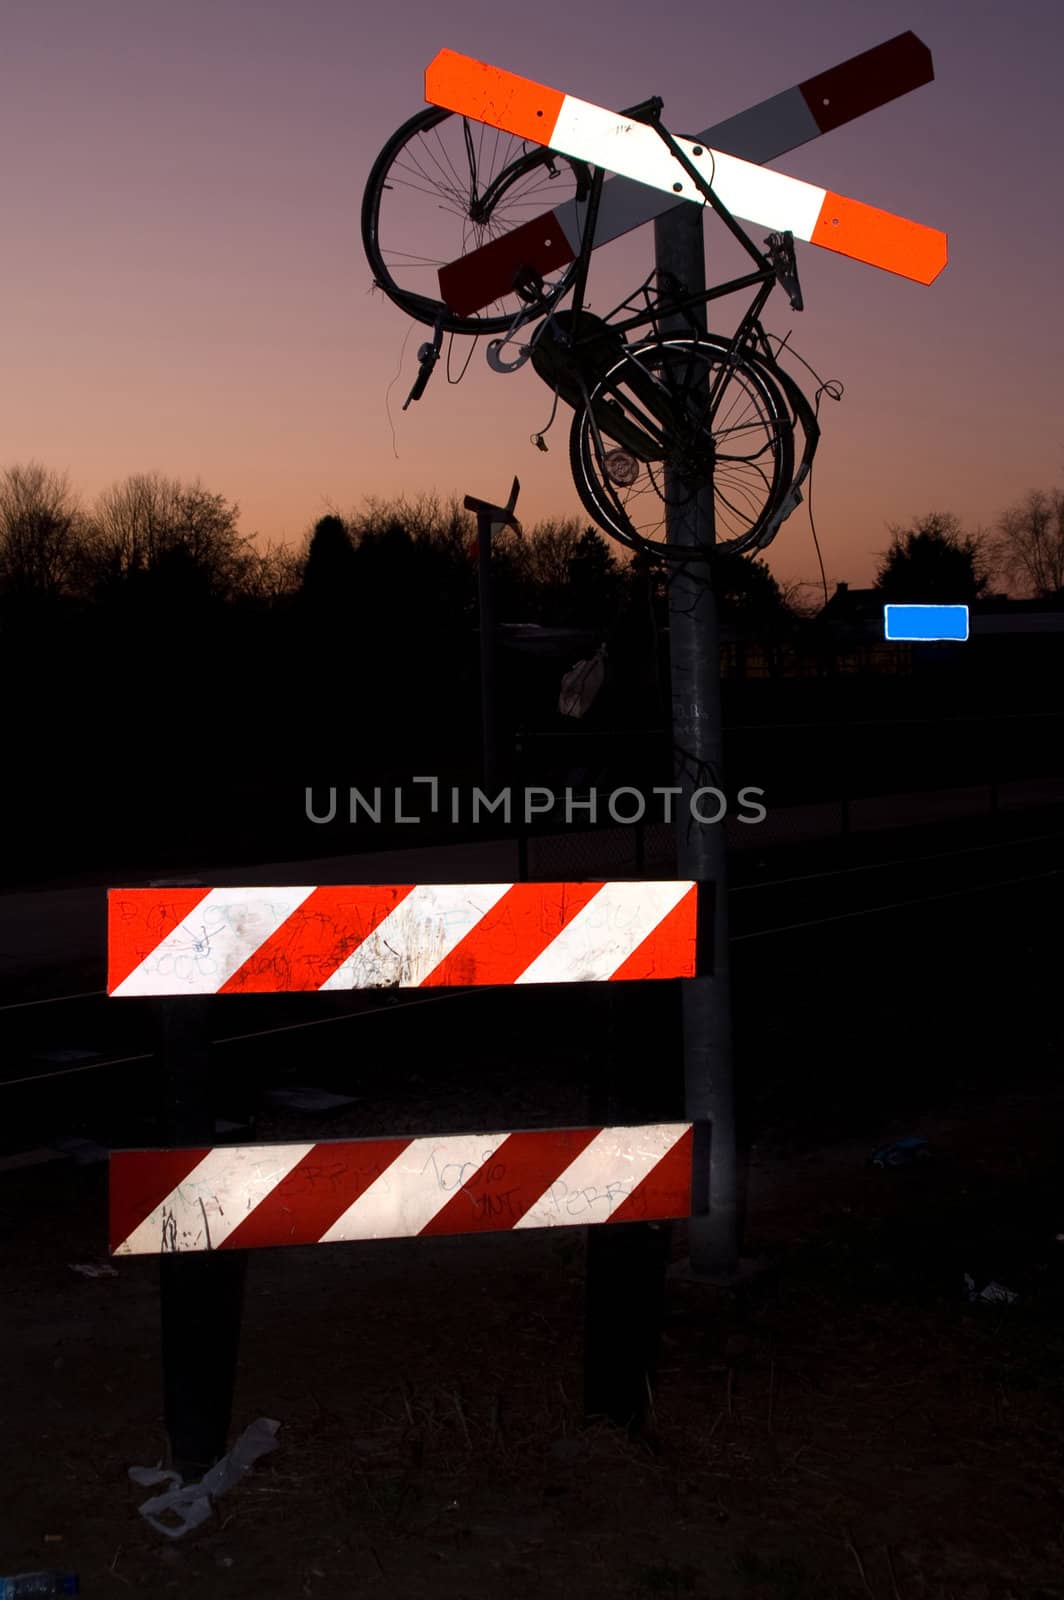 hanging old bike in a railroad crossing sign
